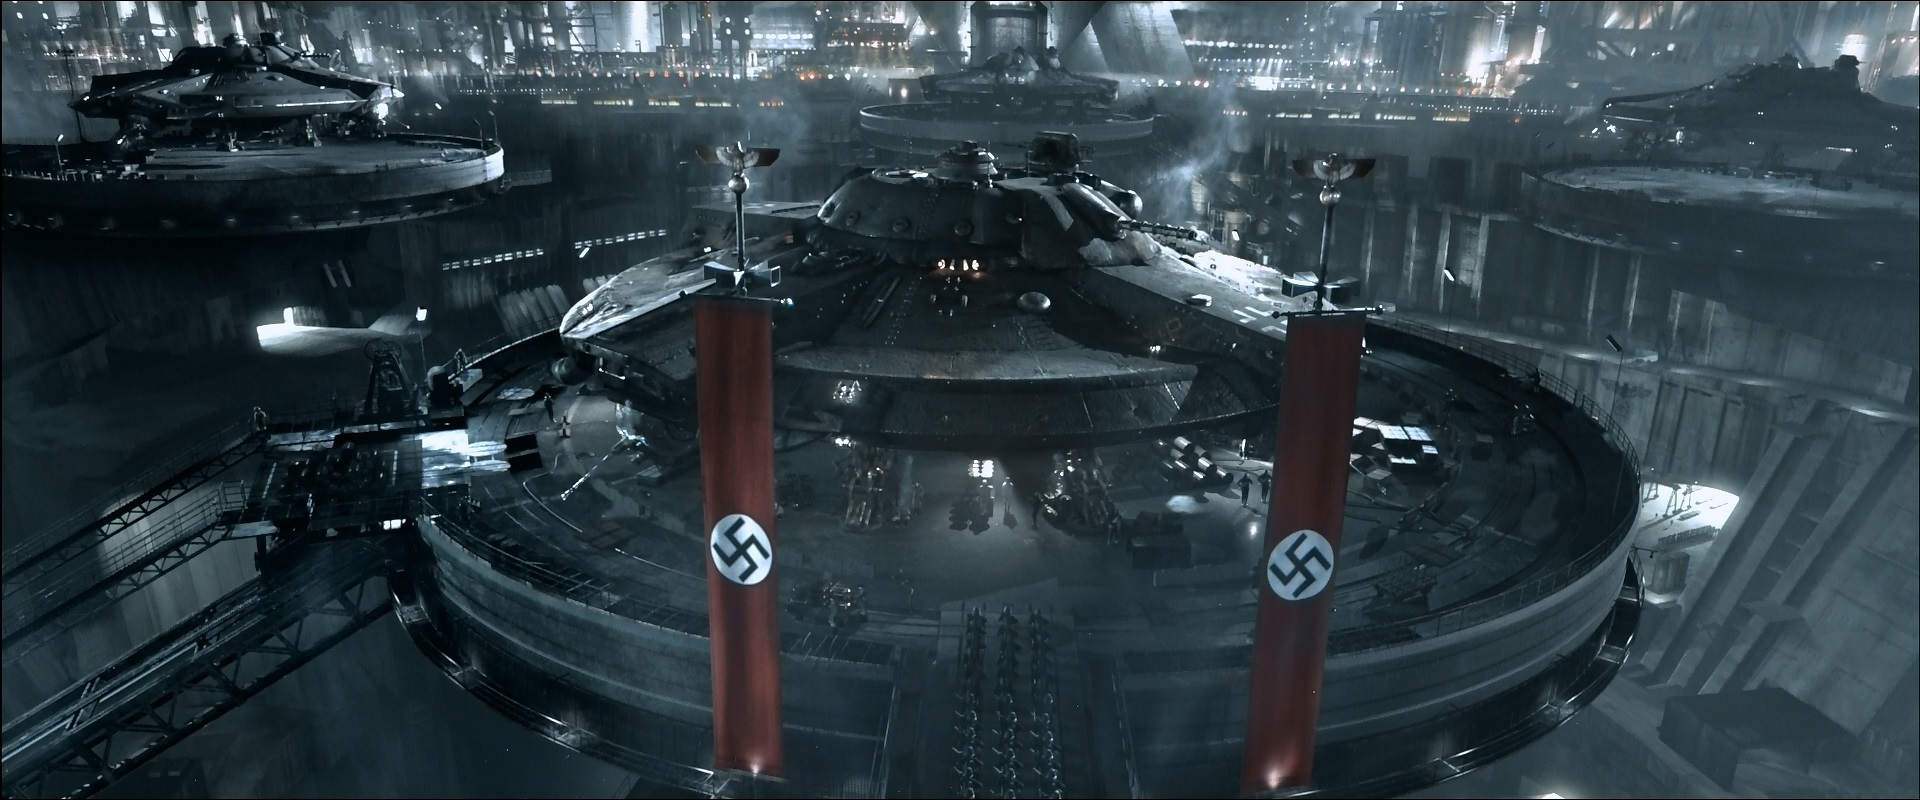 Nazi flying saucers on The Moon in Iron Sky (2012)